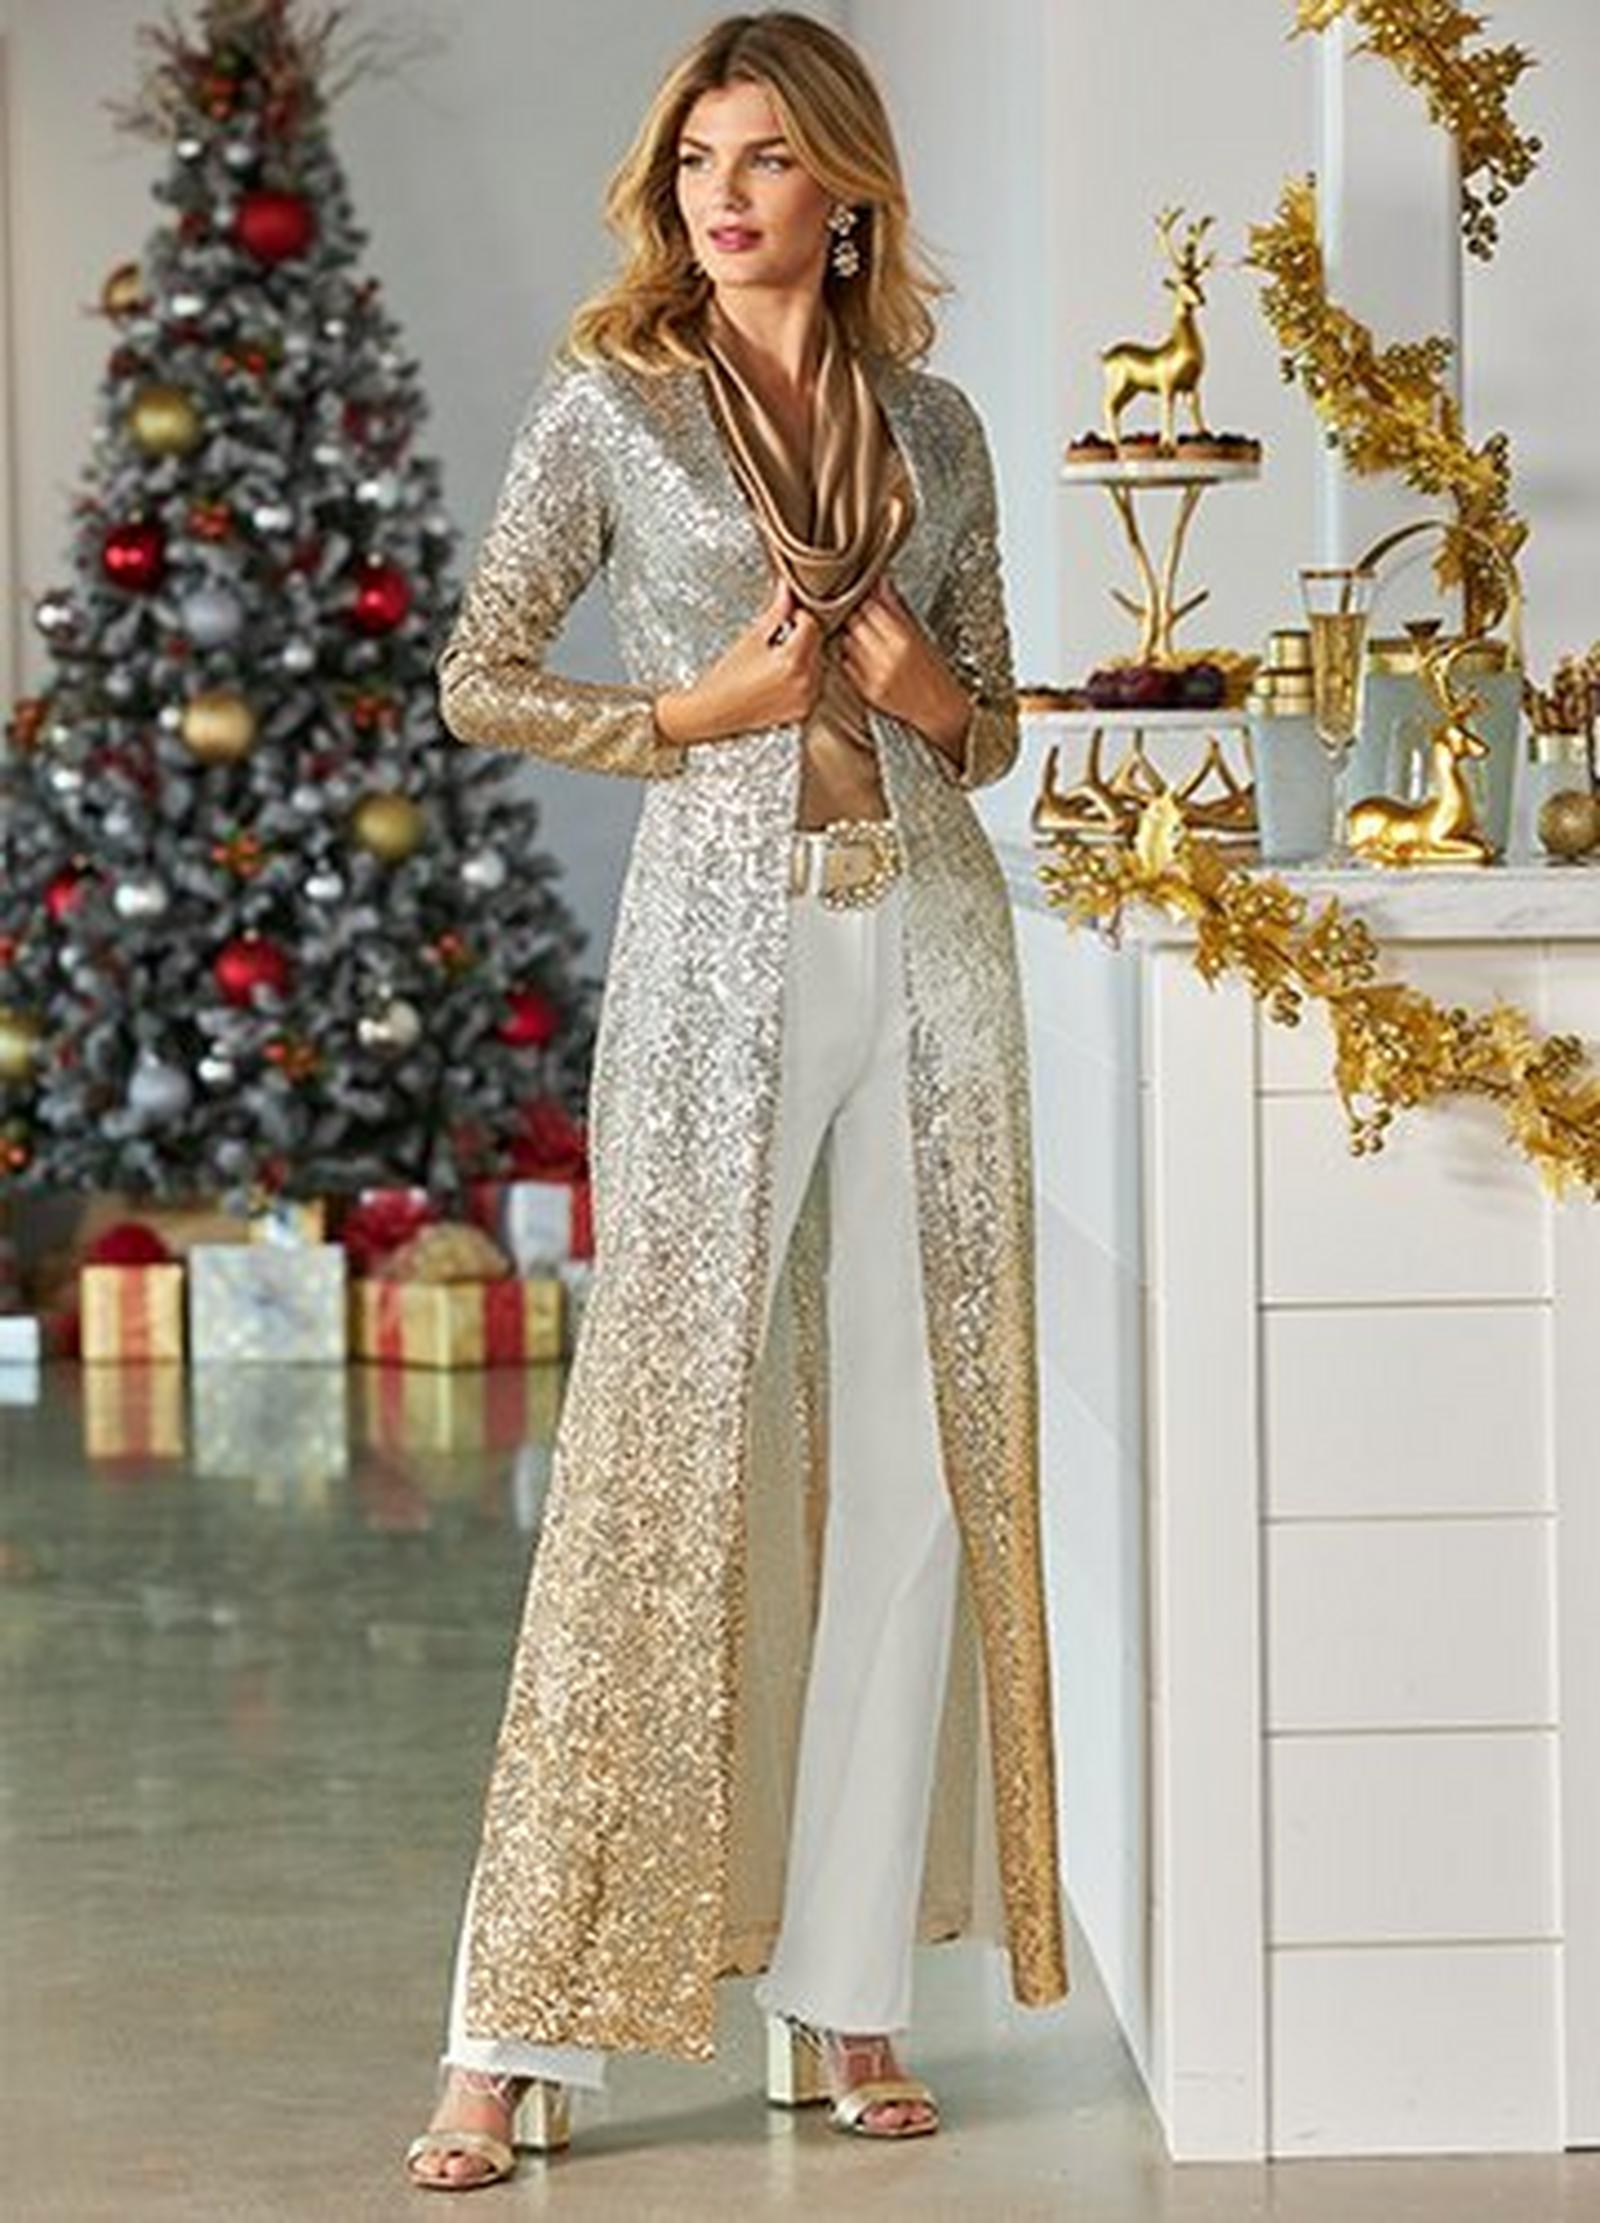 model wearing a silver and gold sequin ombre long duster, tan cowl neck sleeveless charmeuse blouse, gold rhinestone belt, and white bootcut jeans.